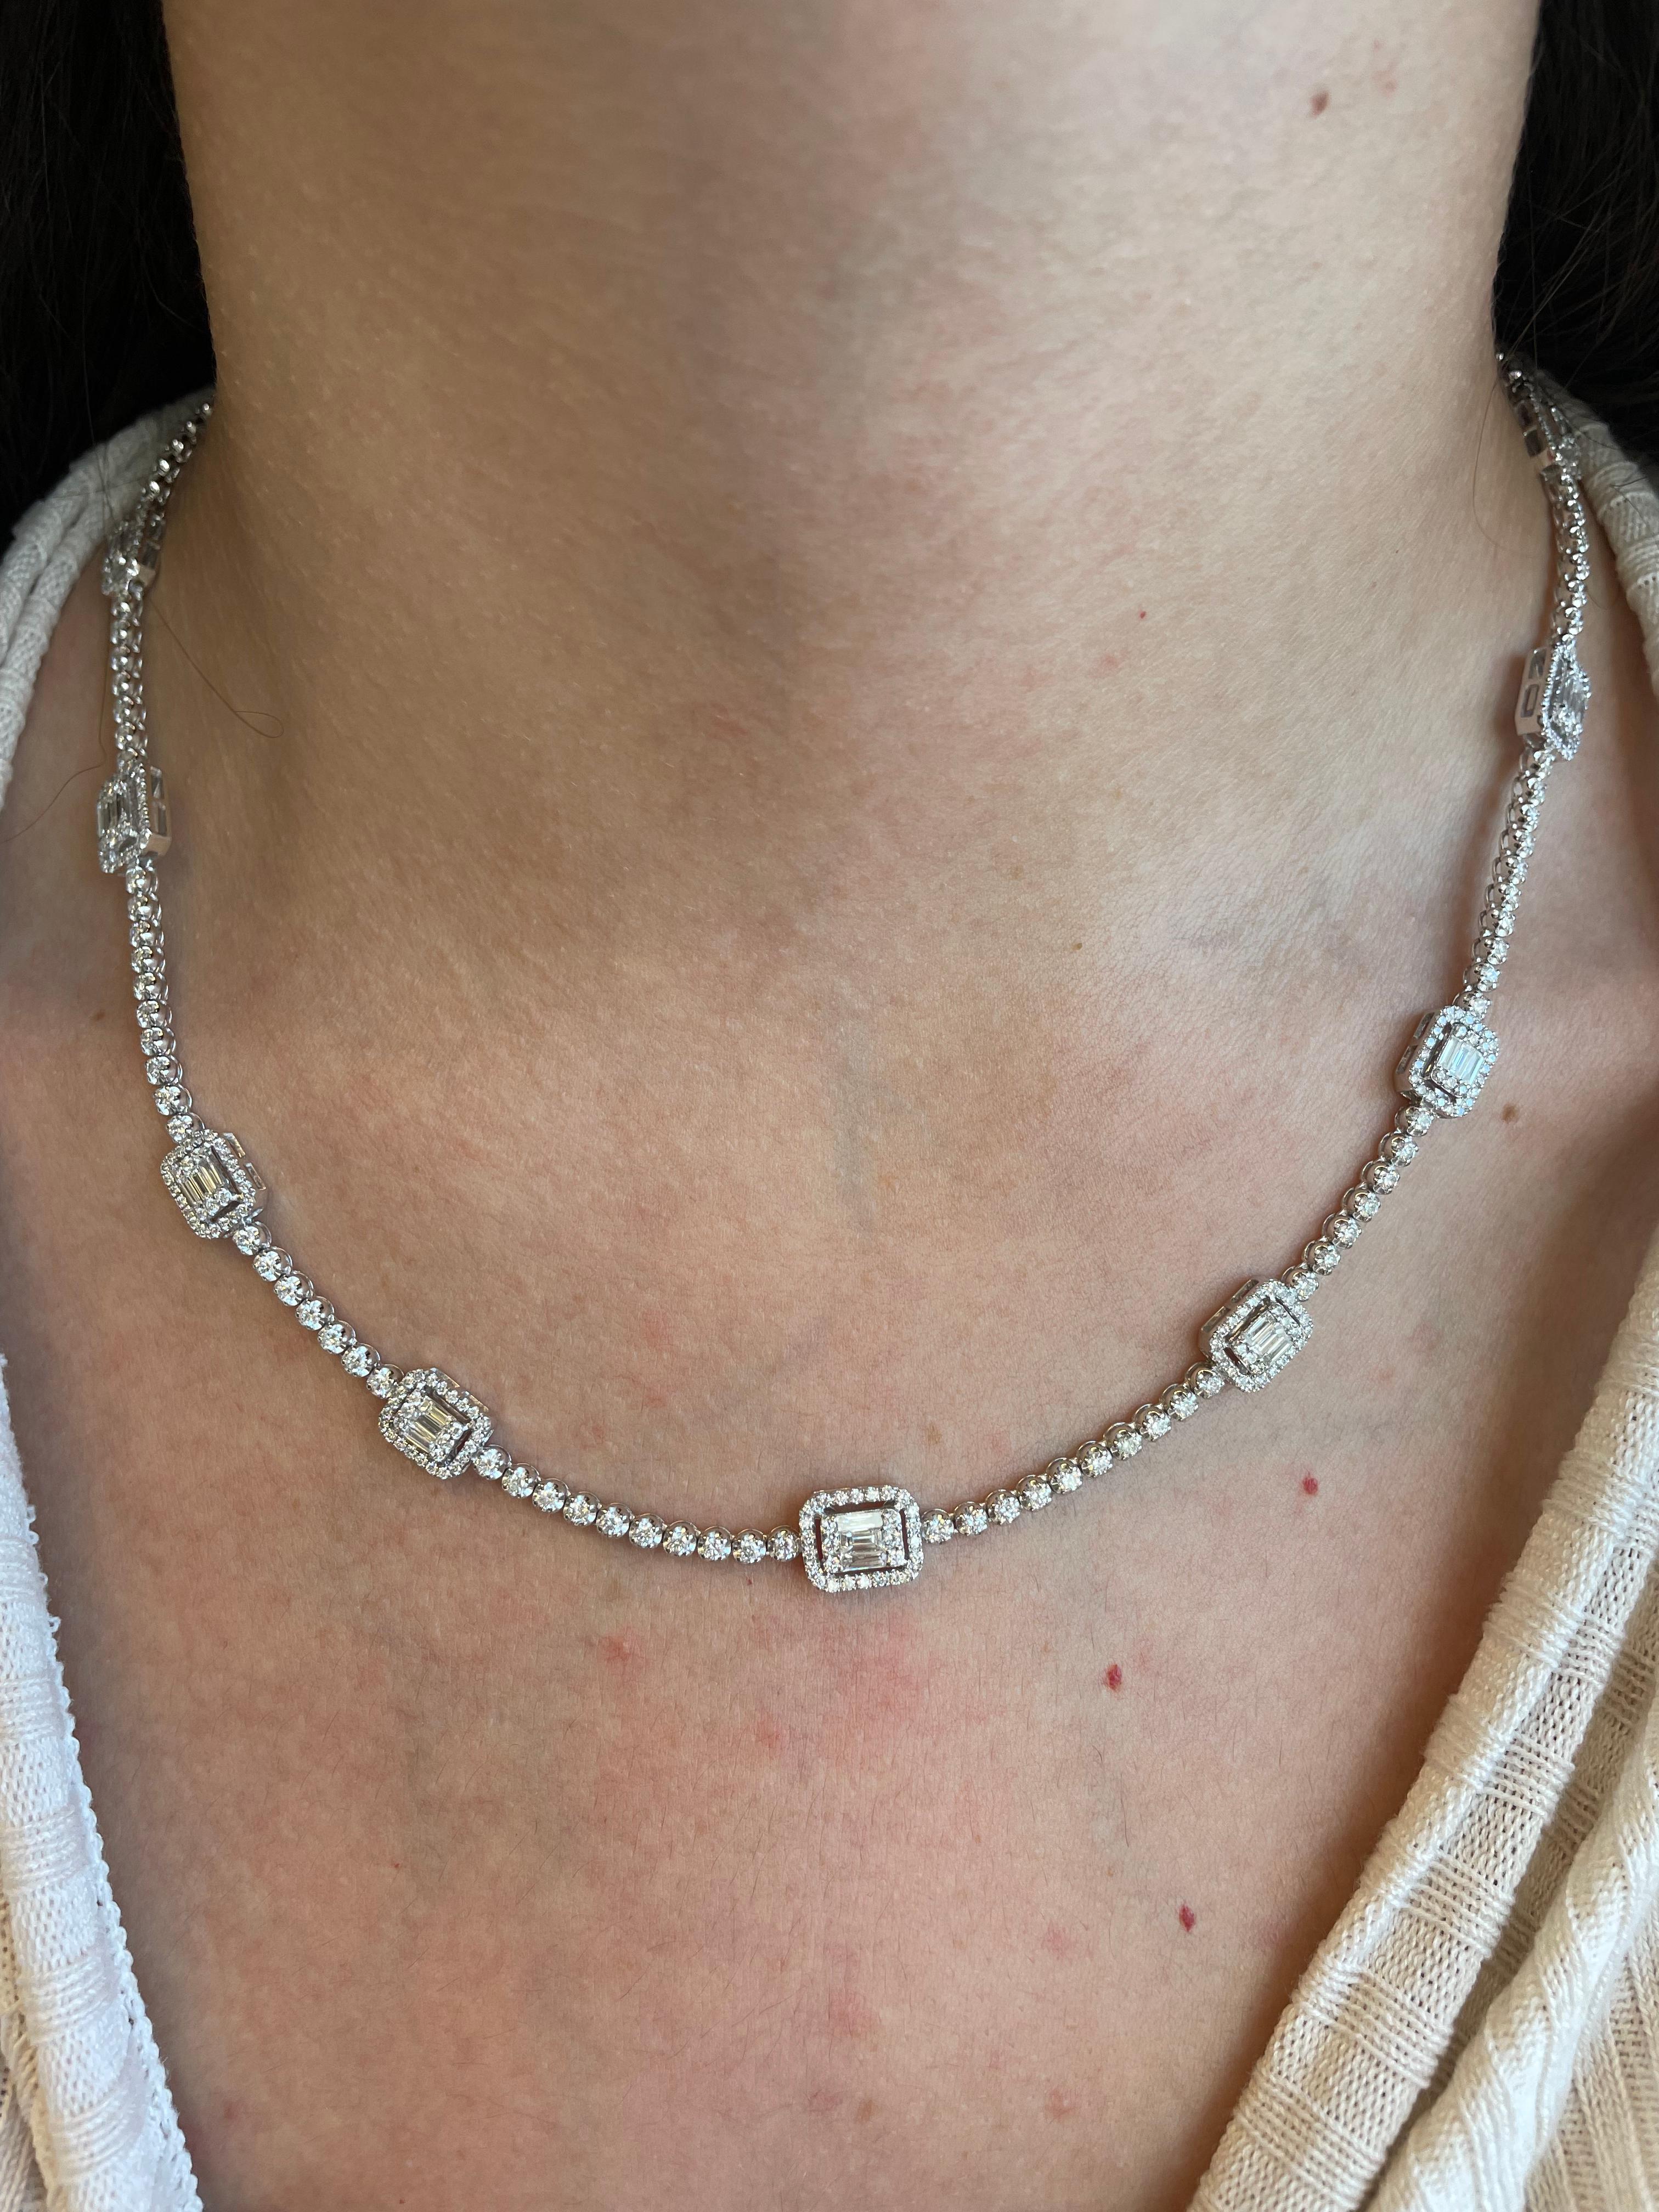 Exquisite and timeless diamonds tennis necklace with illusion set diamonds with the look of emerald cut diamonds. By Alexander Beverly Hills.
409 round, princess, and baguette shape diamonds, 5.88 carats total. Nine emerald cut shape diamond